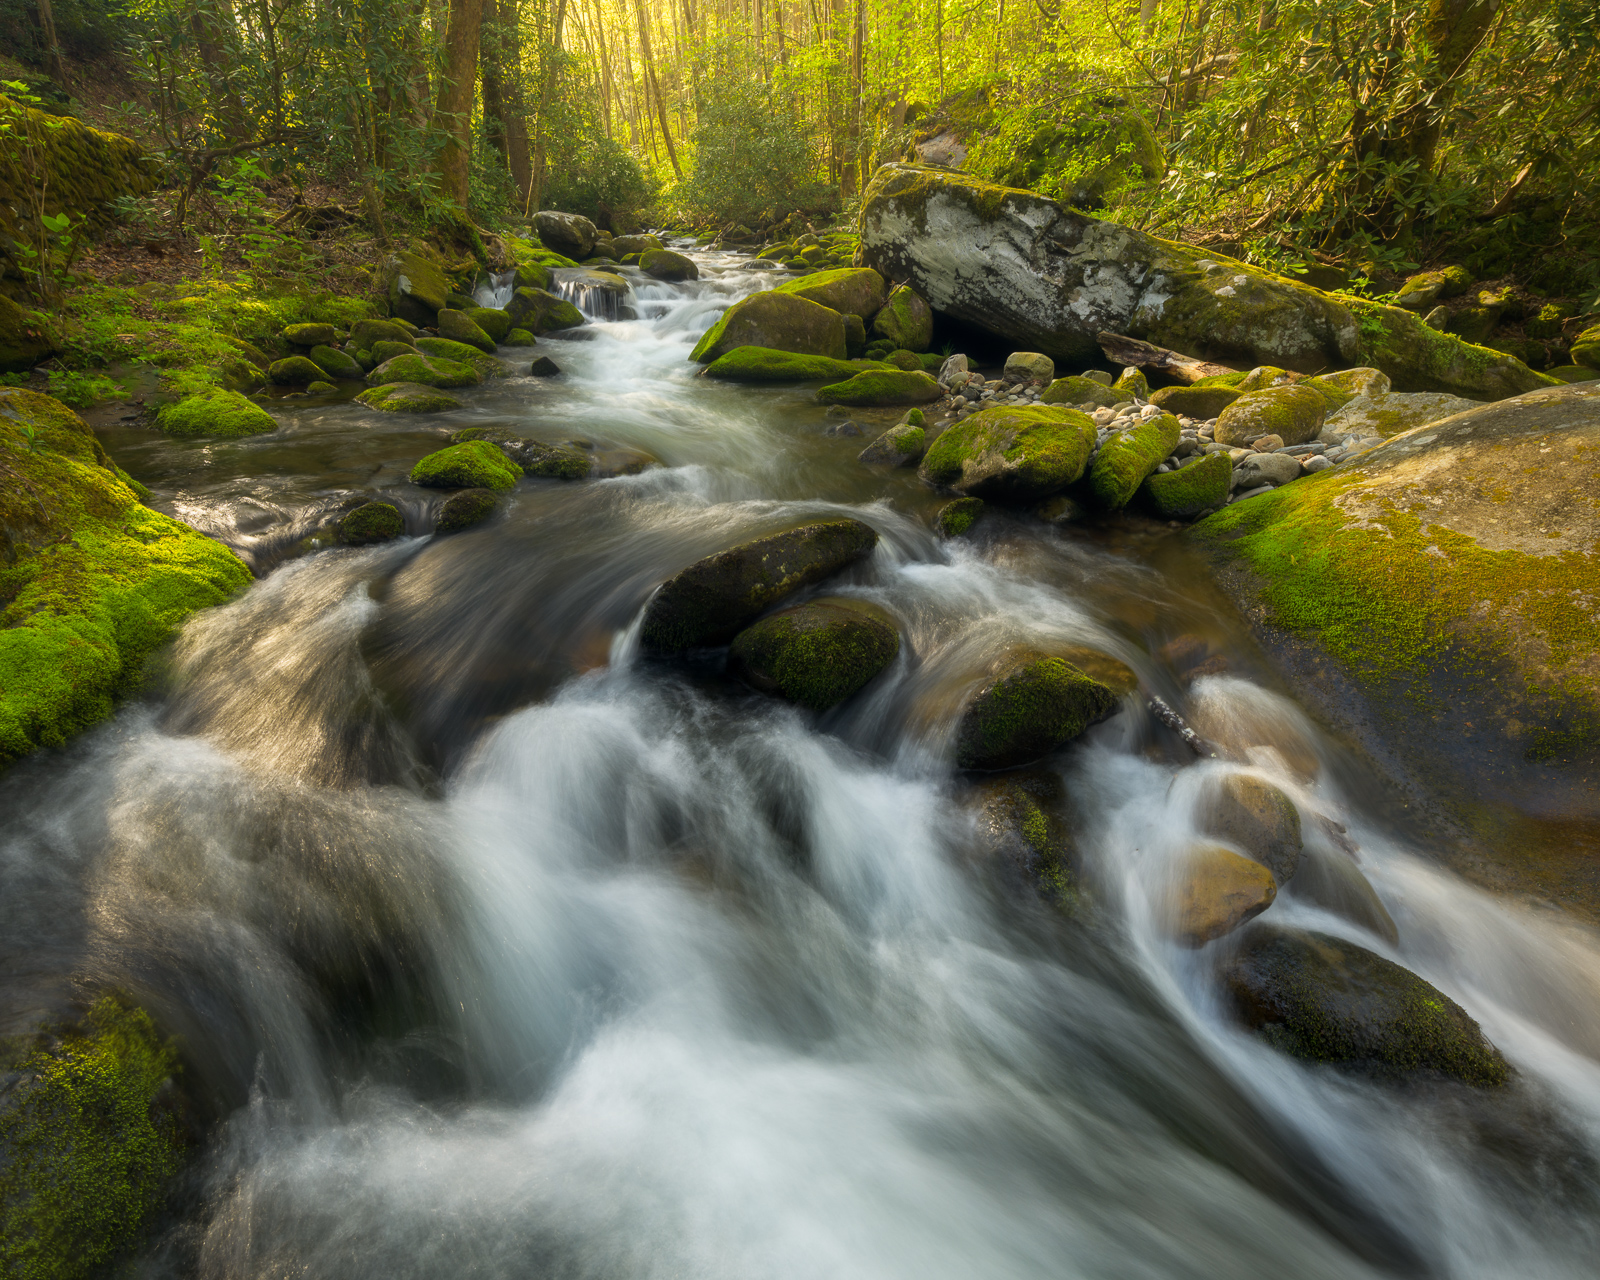 Stream in the Smoky Mountains